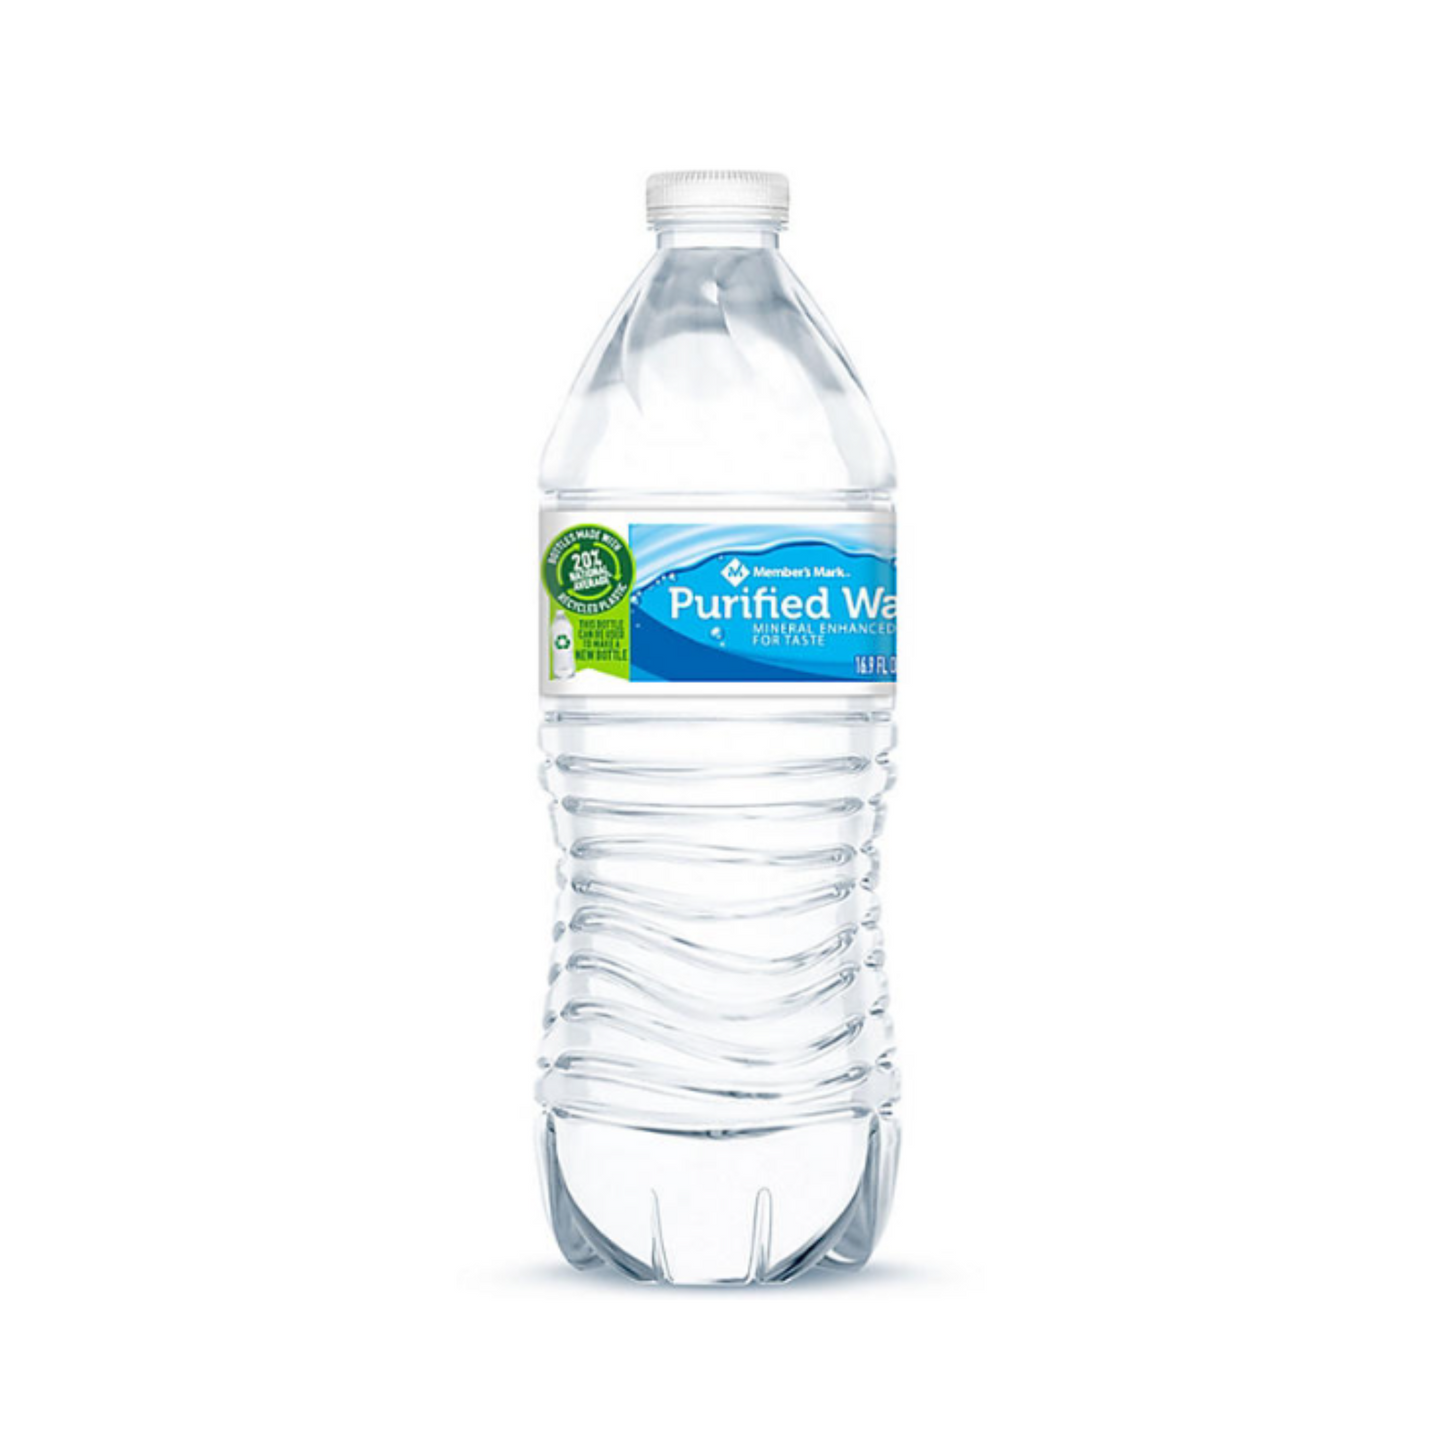 Stock up on purified water with our convenient 40-pack of 16.9 oz bottles